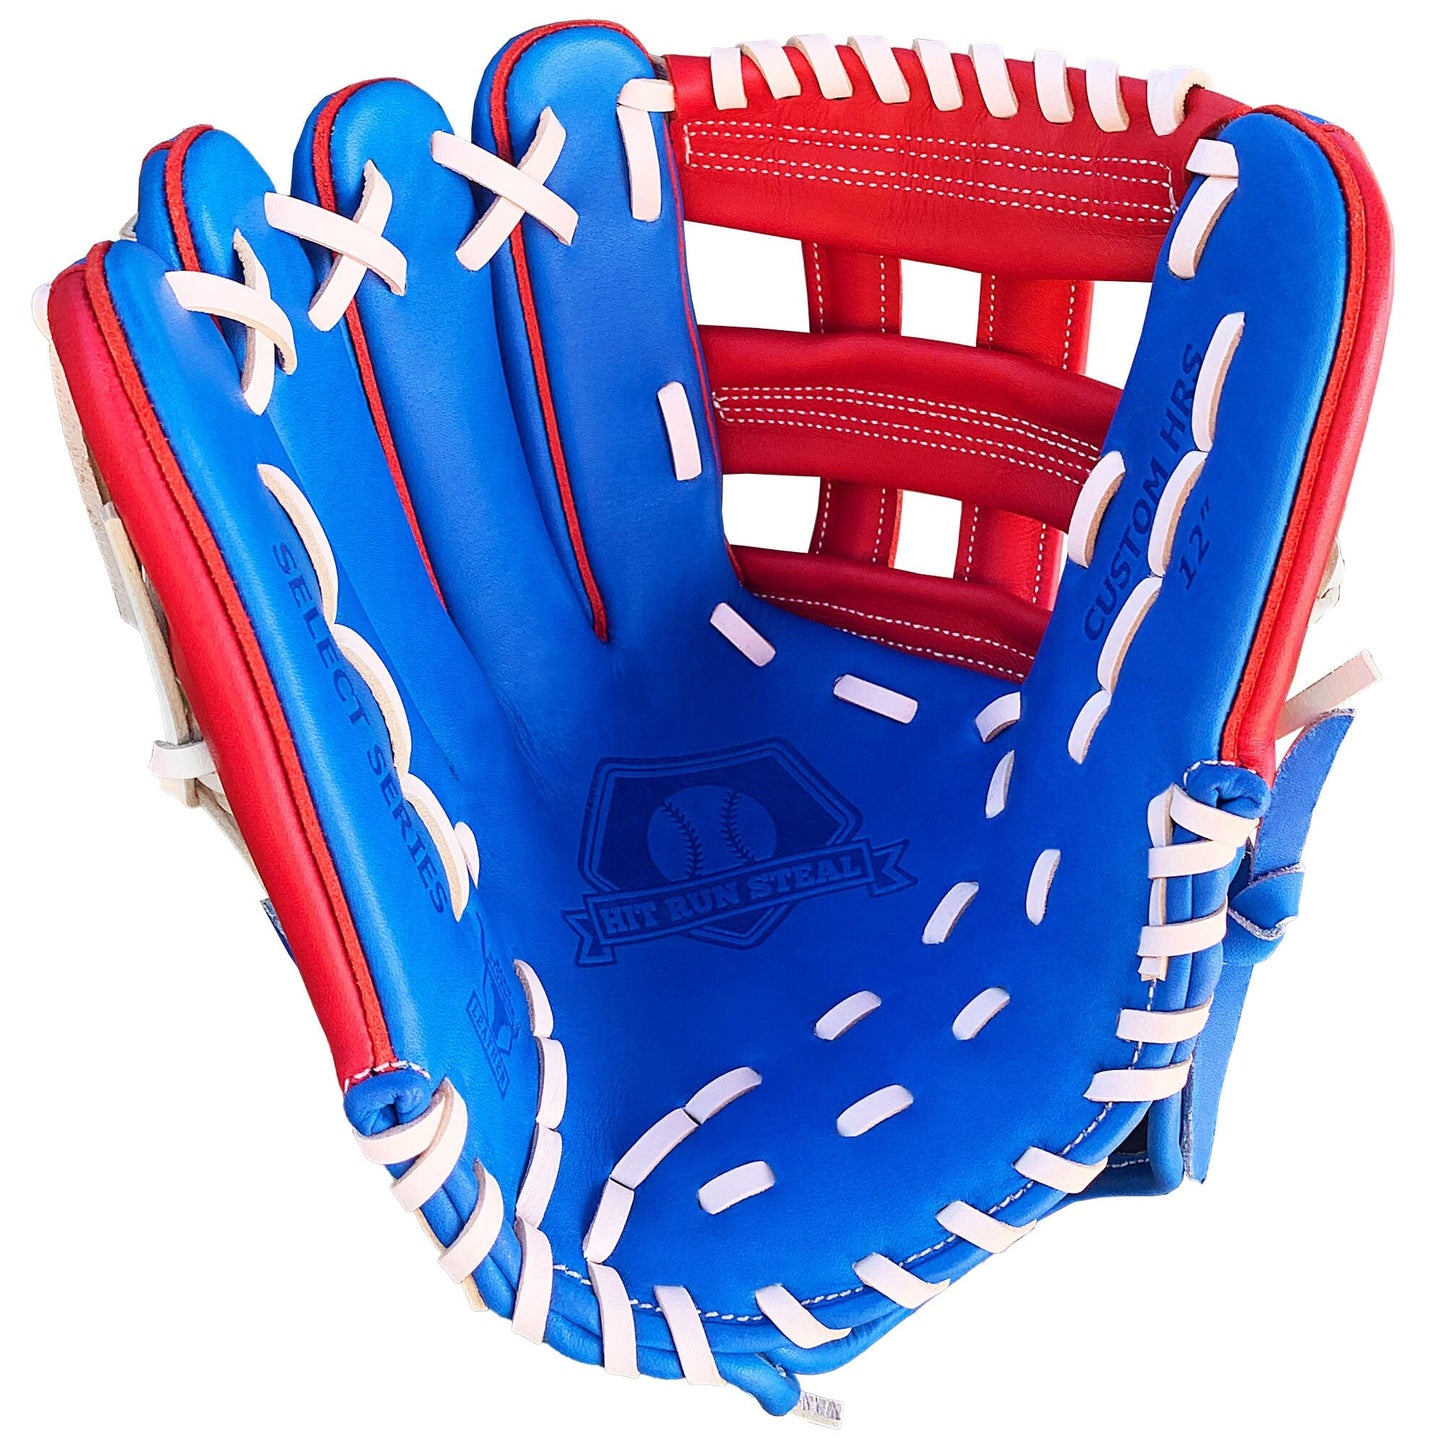 12" - Red / White / Blue - H Web